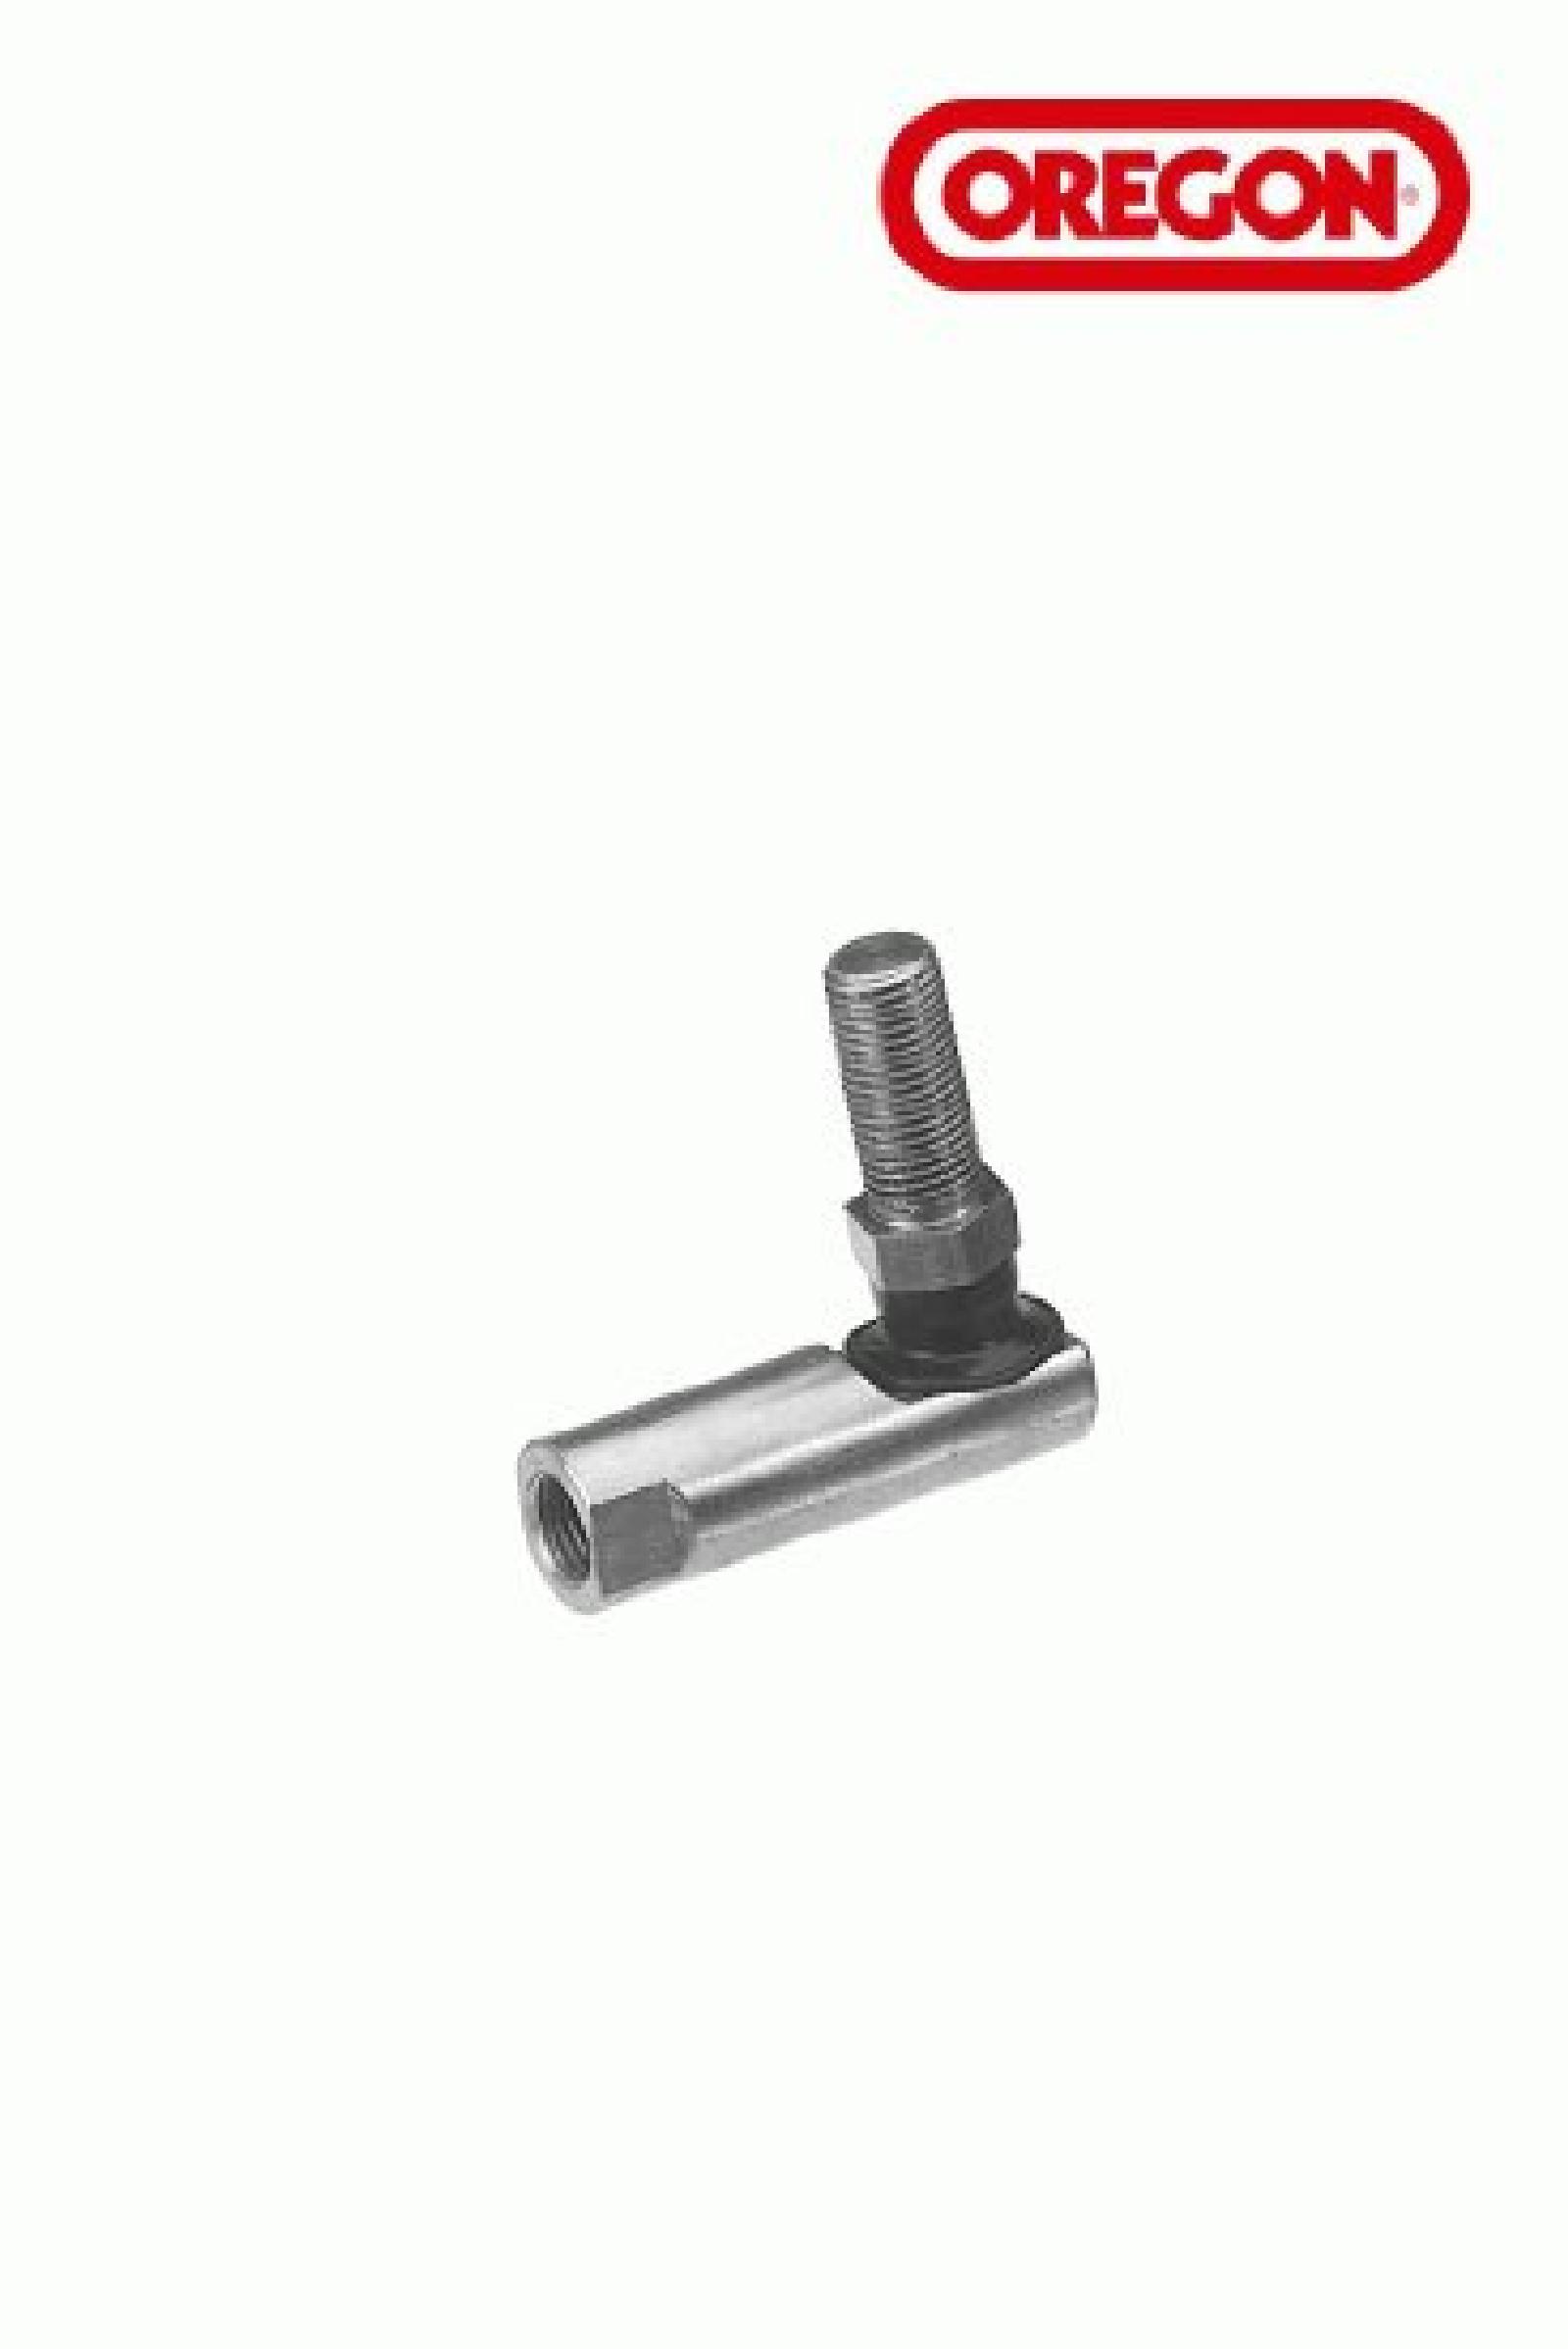 BALL JOINT 1/2 20 RH JOHN part# 45114 by Oregon - Click Image to Close